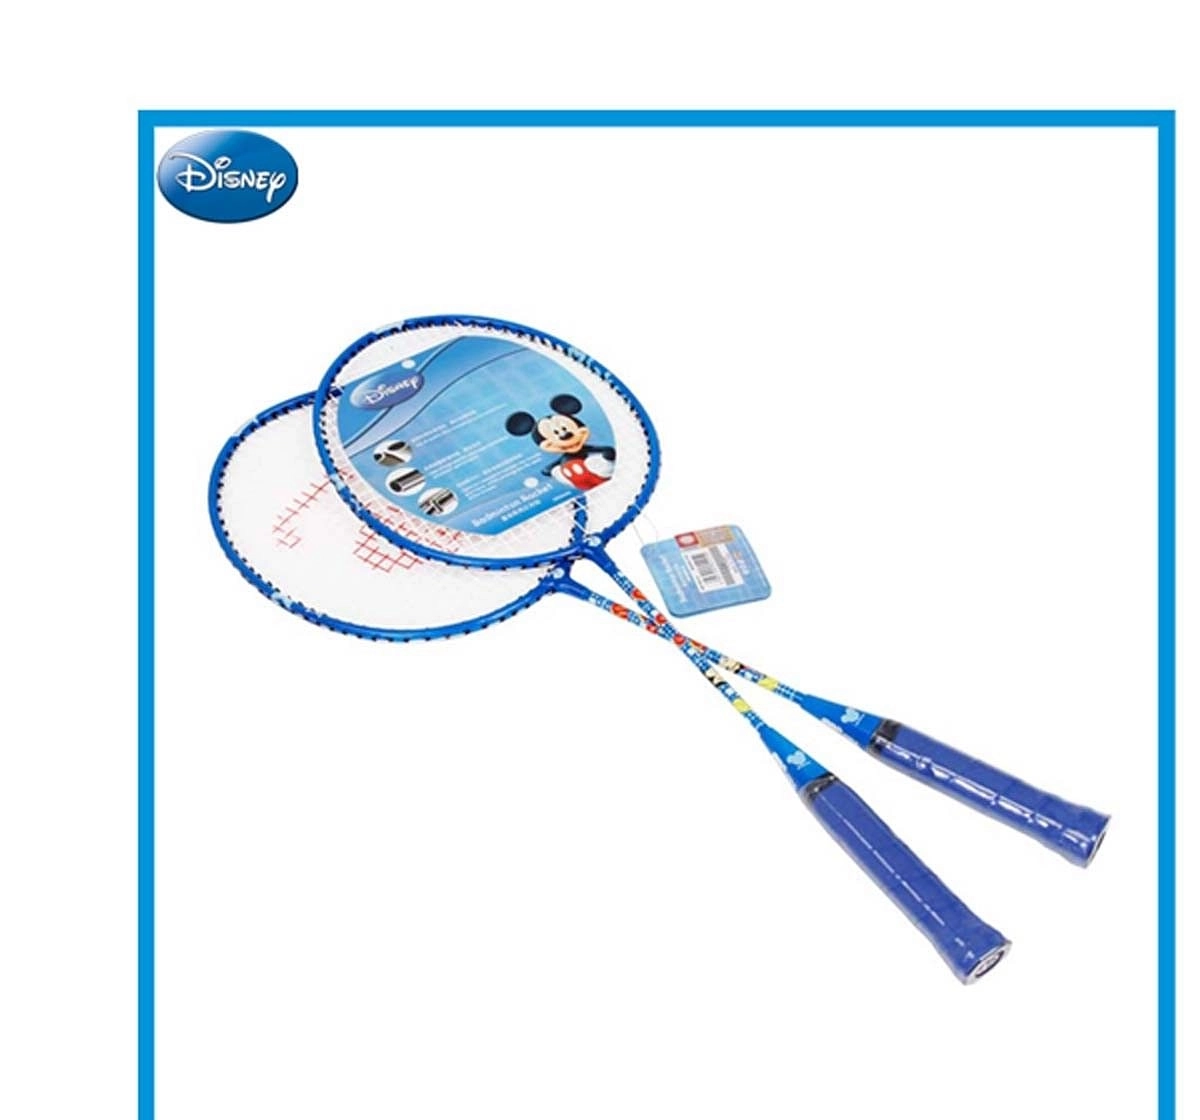 Disney Mesuca Mickey Mouse Blue Badminton Set with Cover, Outdoor Sports for Kids age 4Y+ 